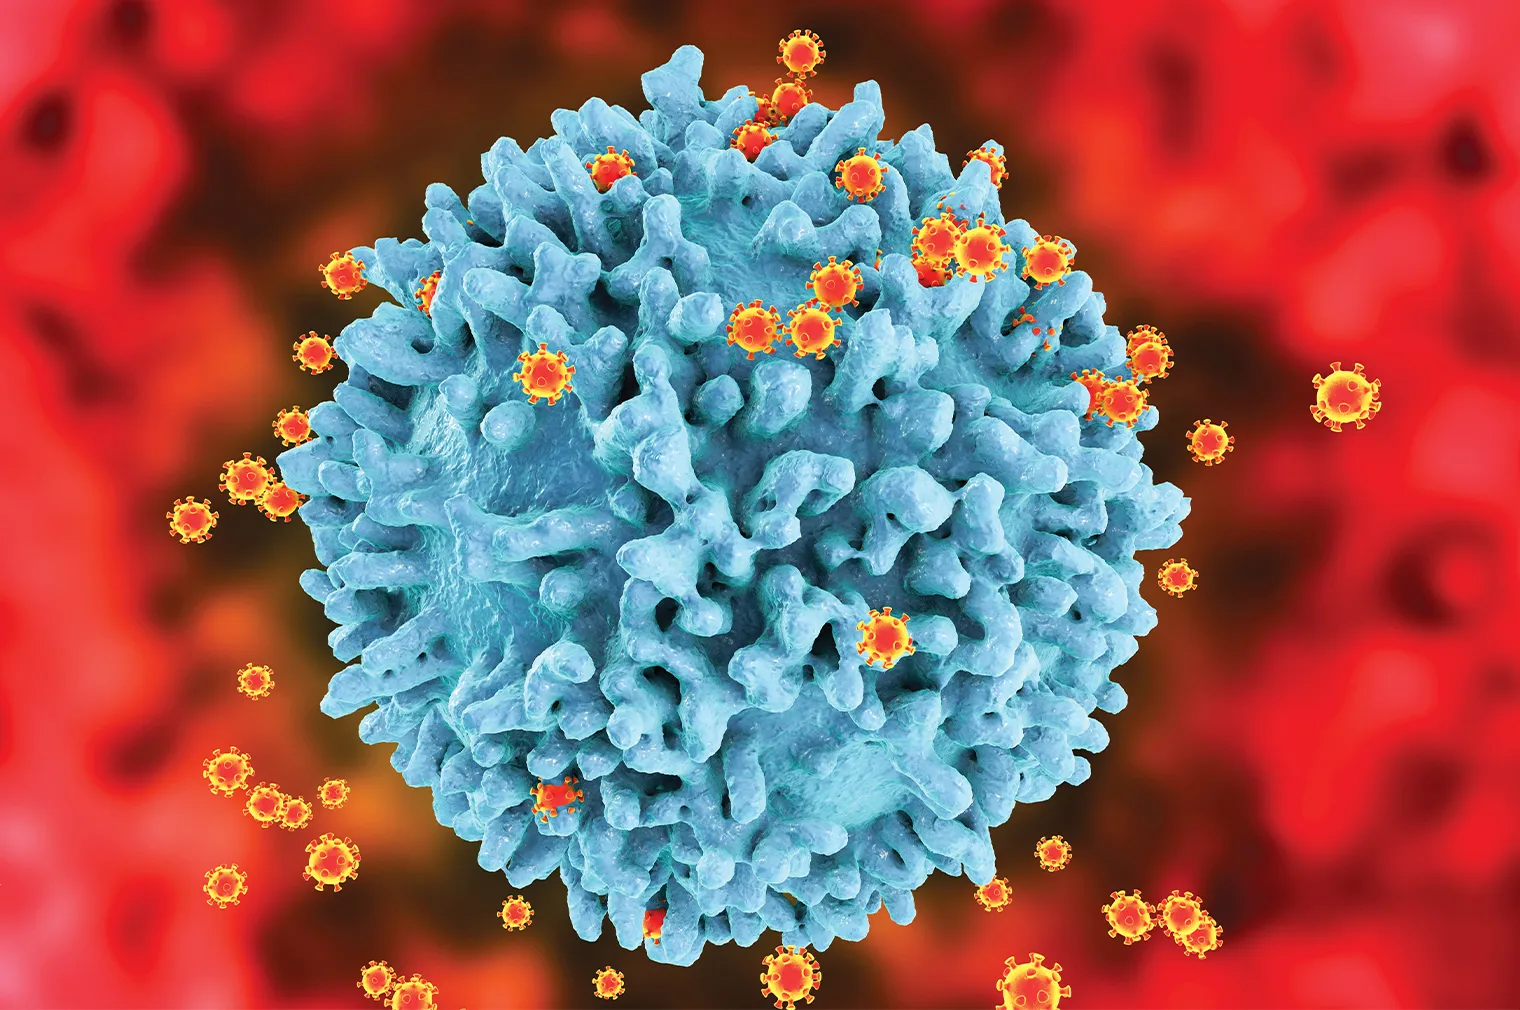 HIV Researchers Have Made Significant Advancements in Fighting the Disease